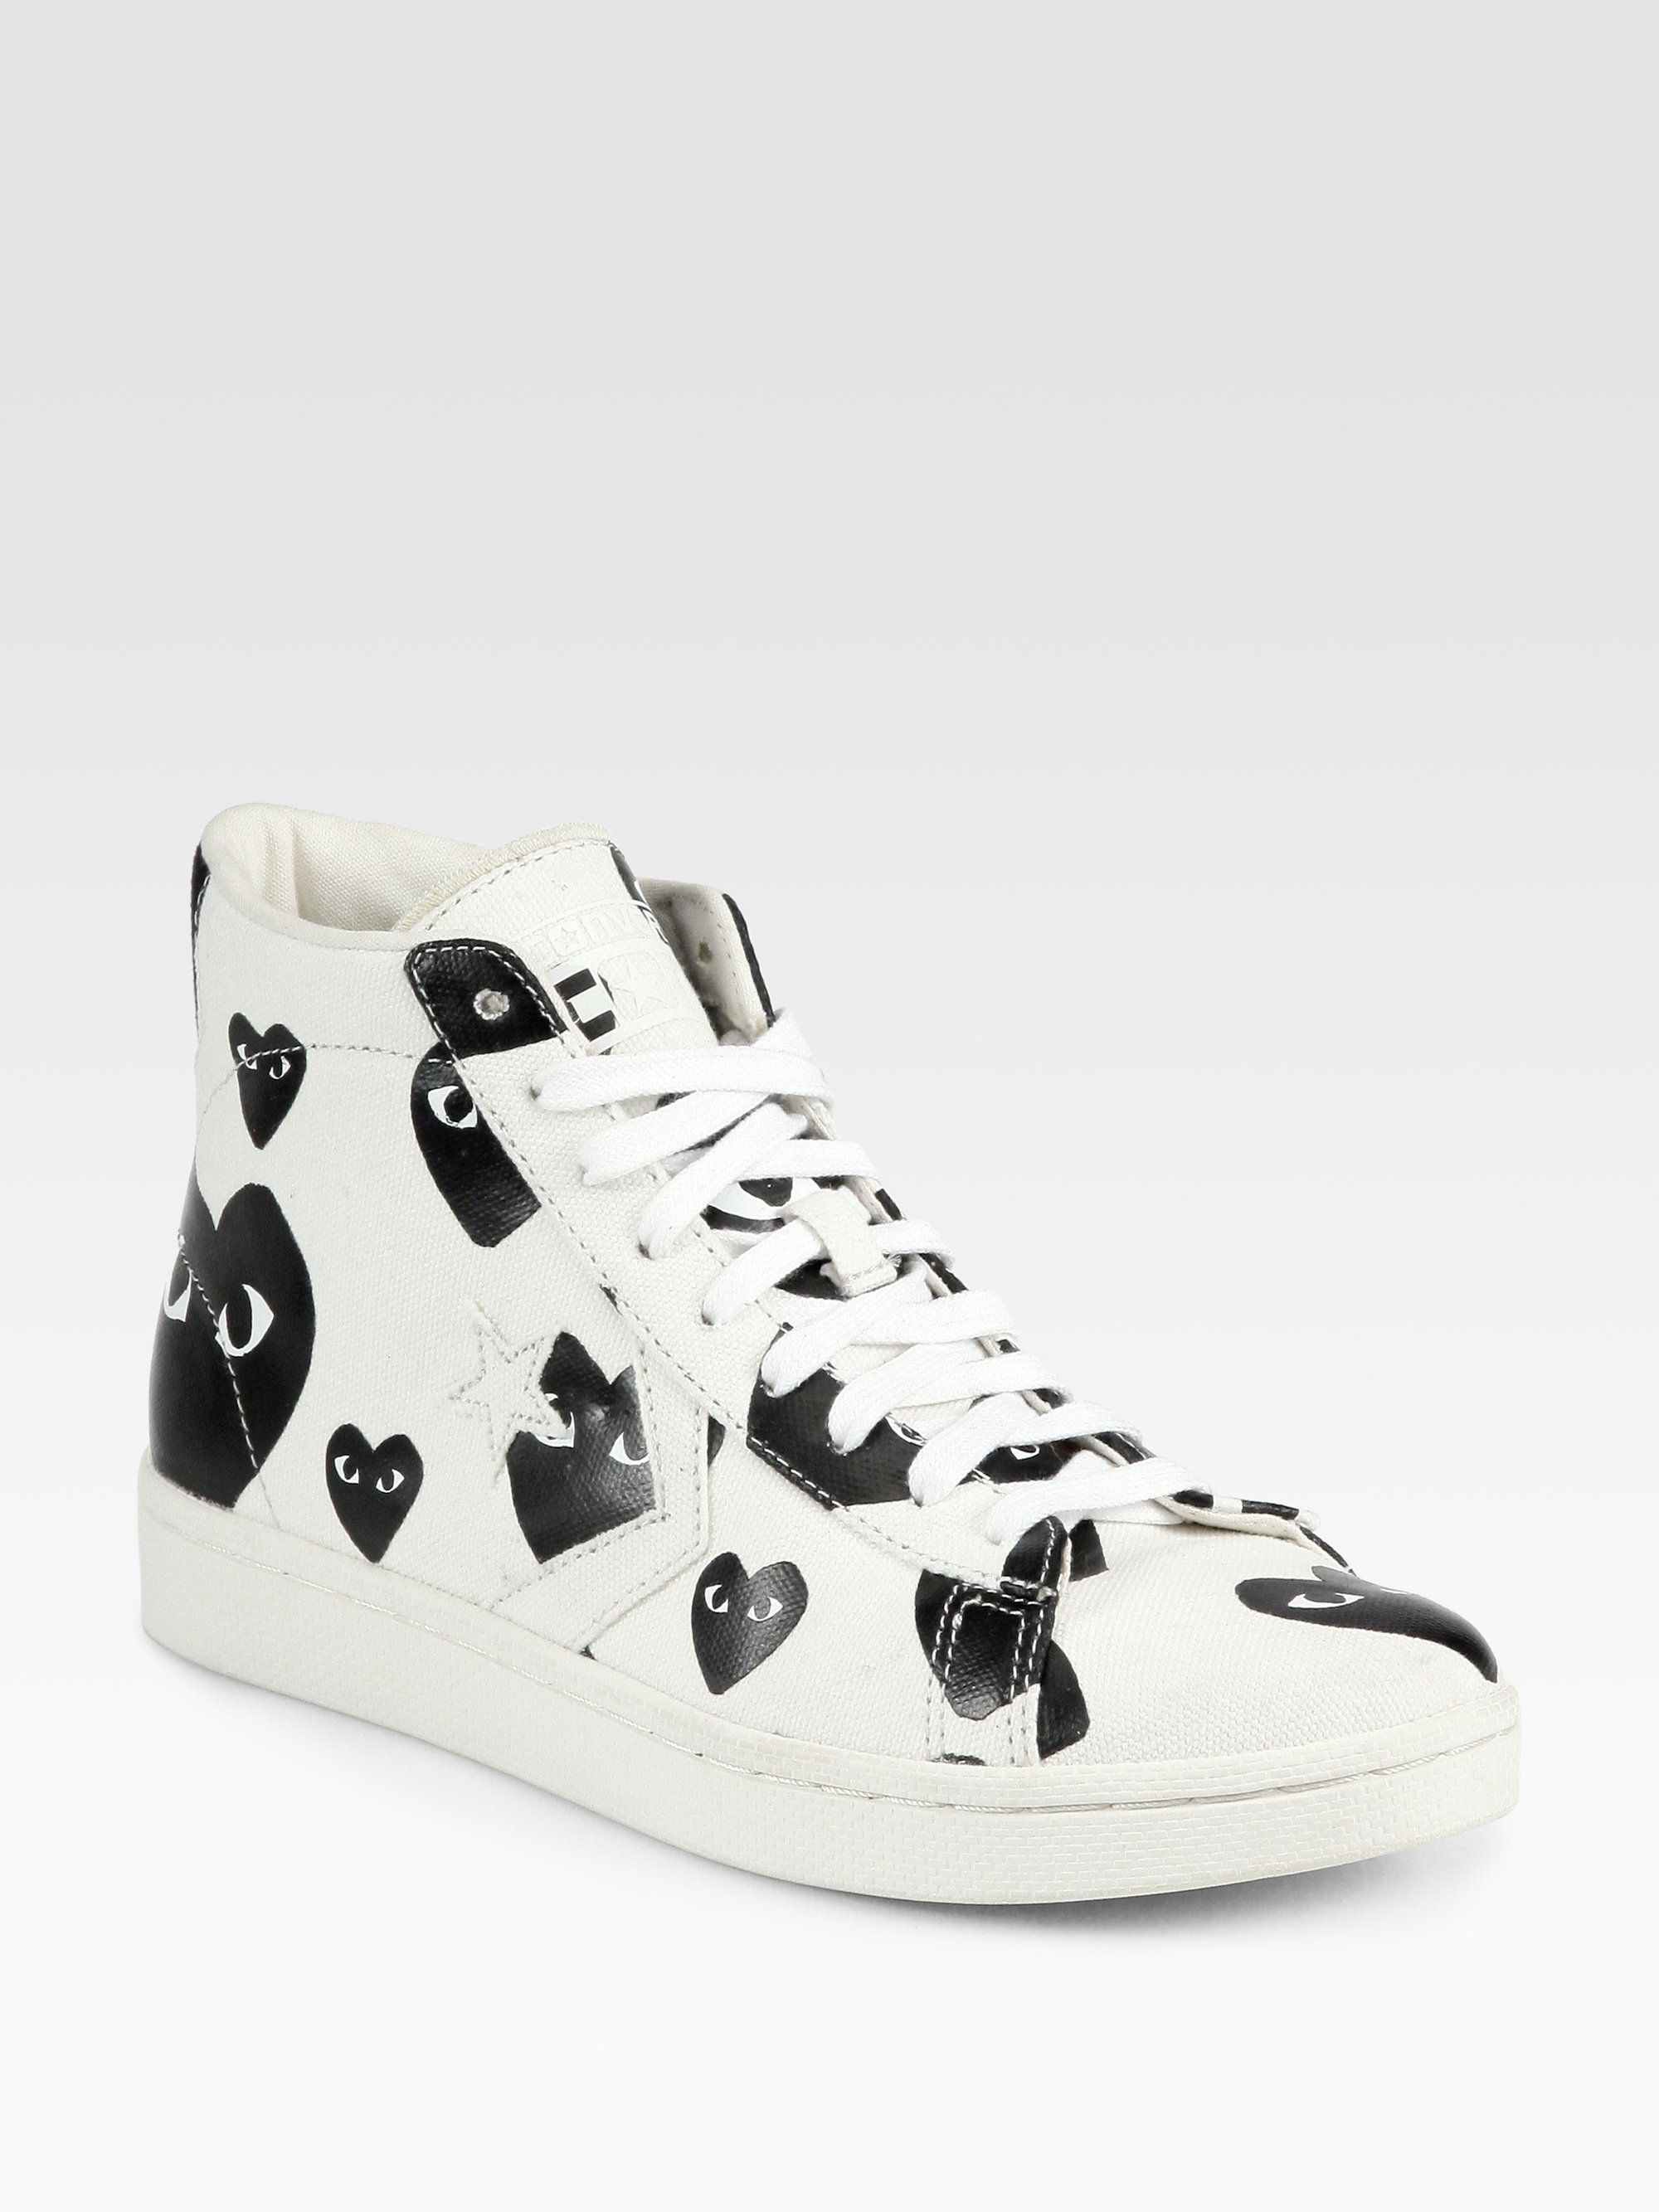 Comme des Garçons Canvas High-Top Sneakers in Black White (White) - Lyst